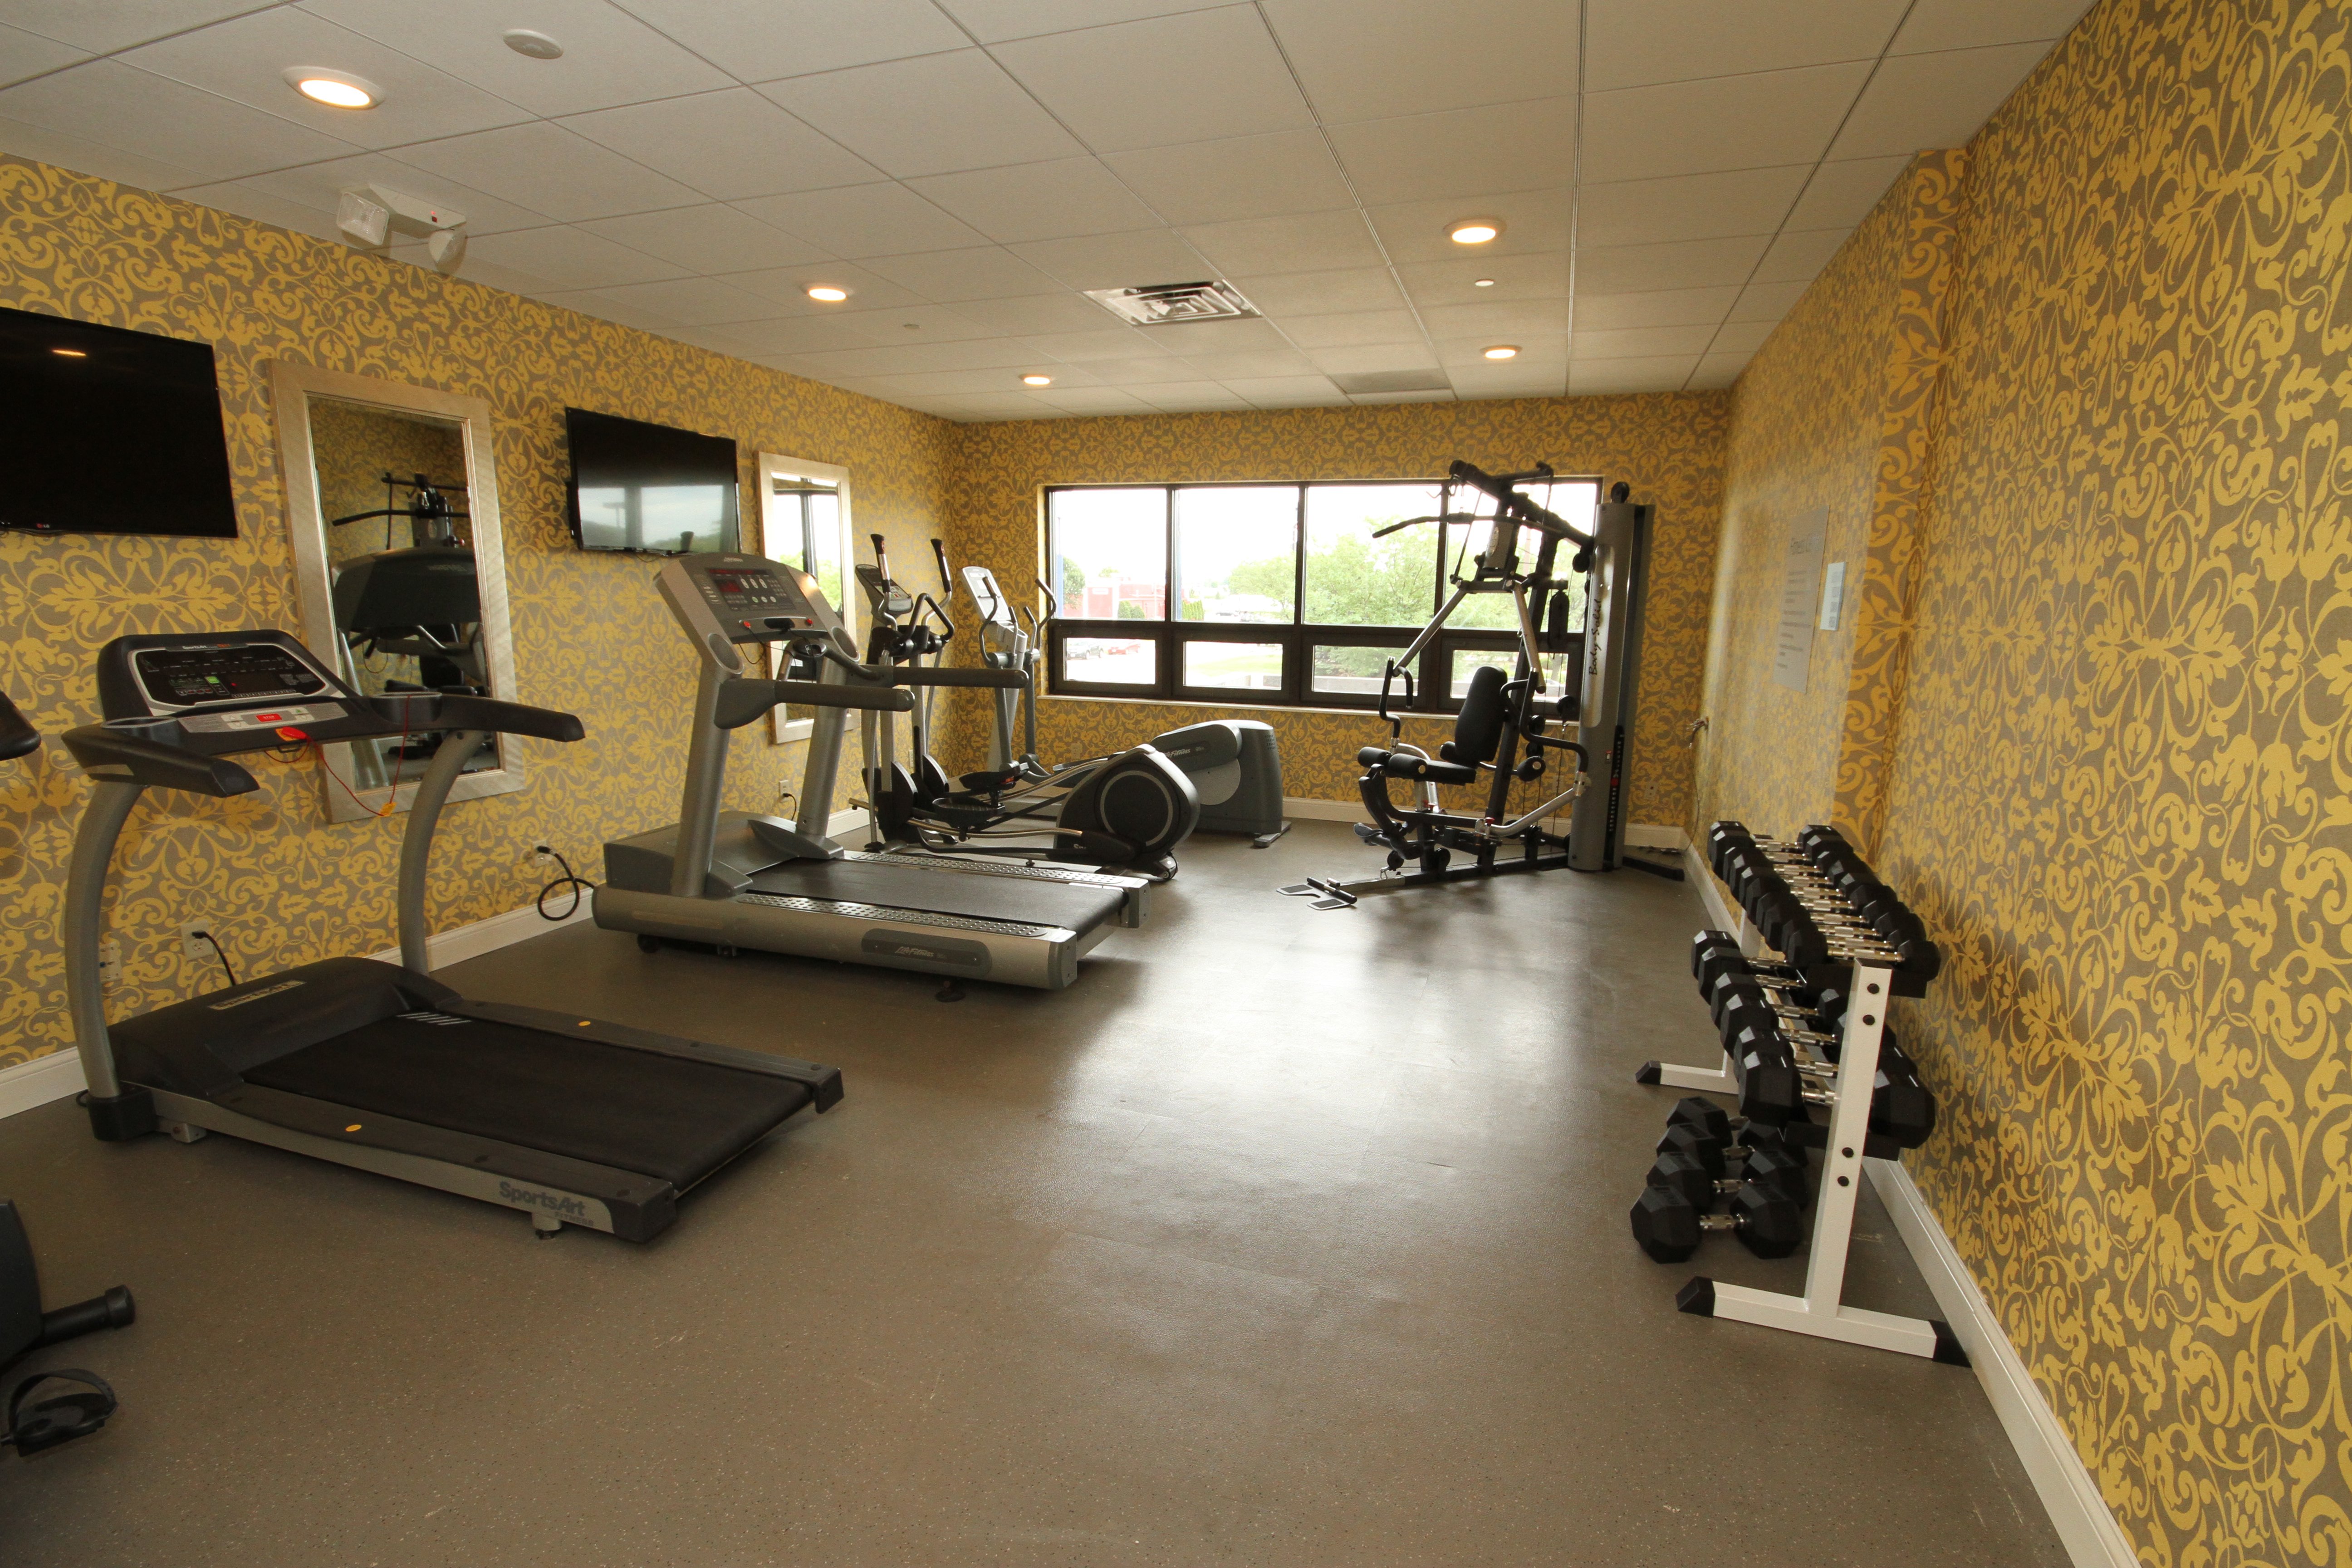 Get your workout in at the Holiday Inn Express Janesville